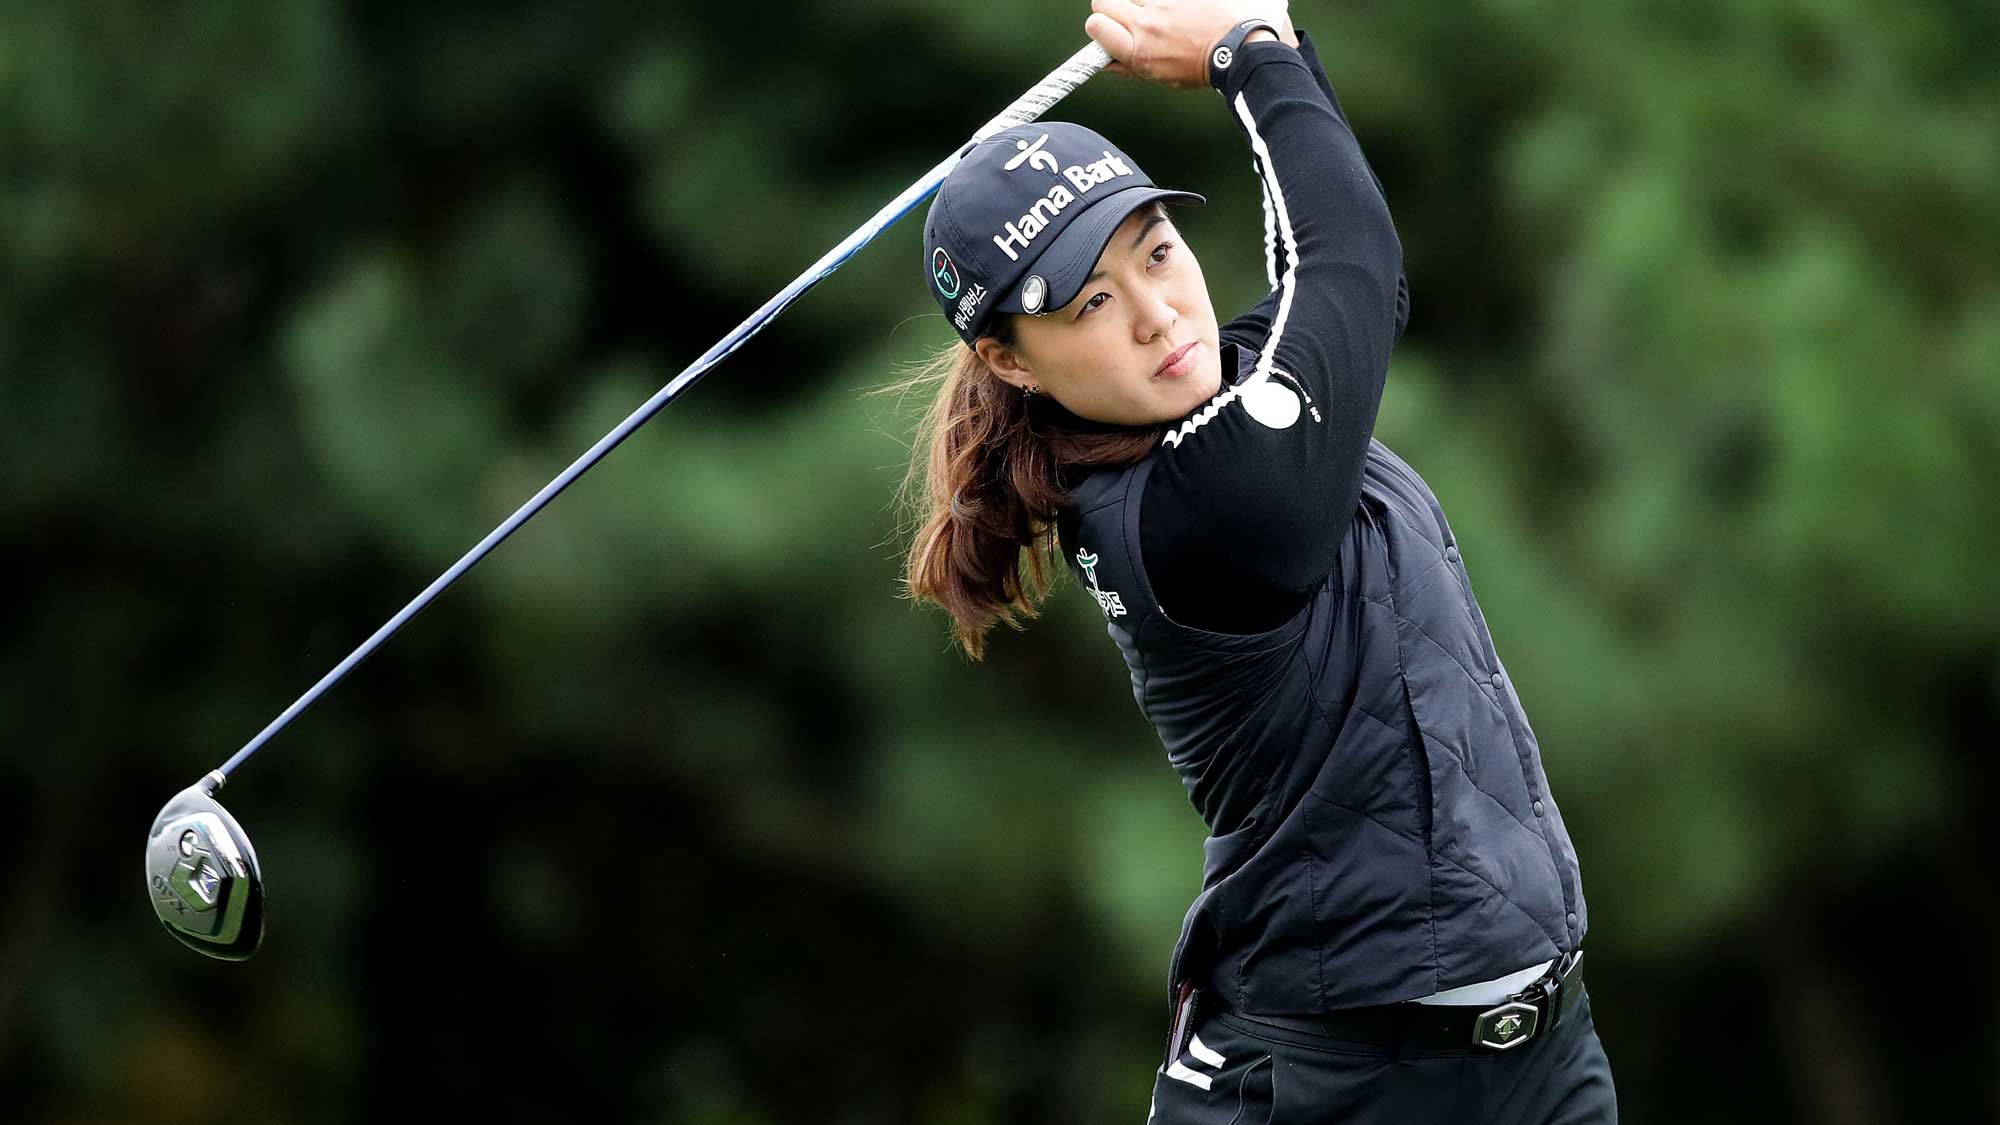 Minjee Lee of Australia plays a tee shot on the 2nd hole during the first round of the LPGA KEB Hana Bank Championship